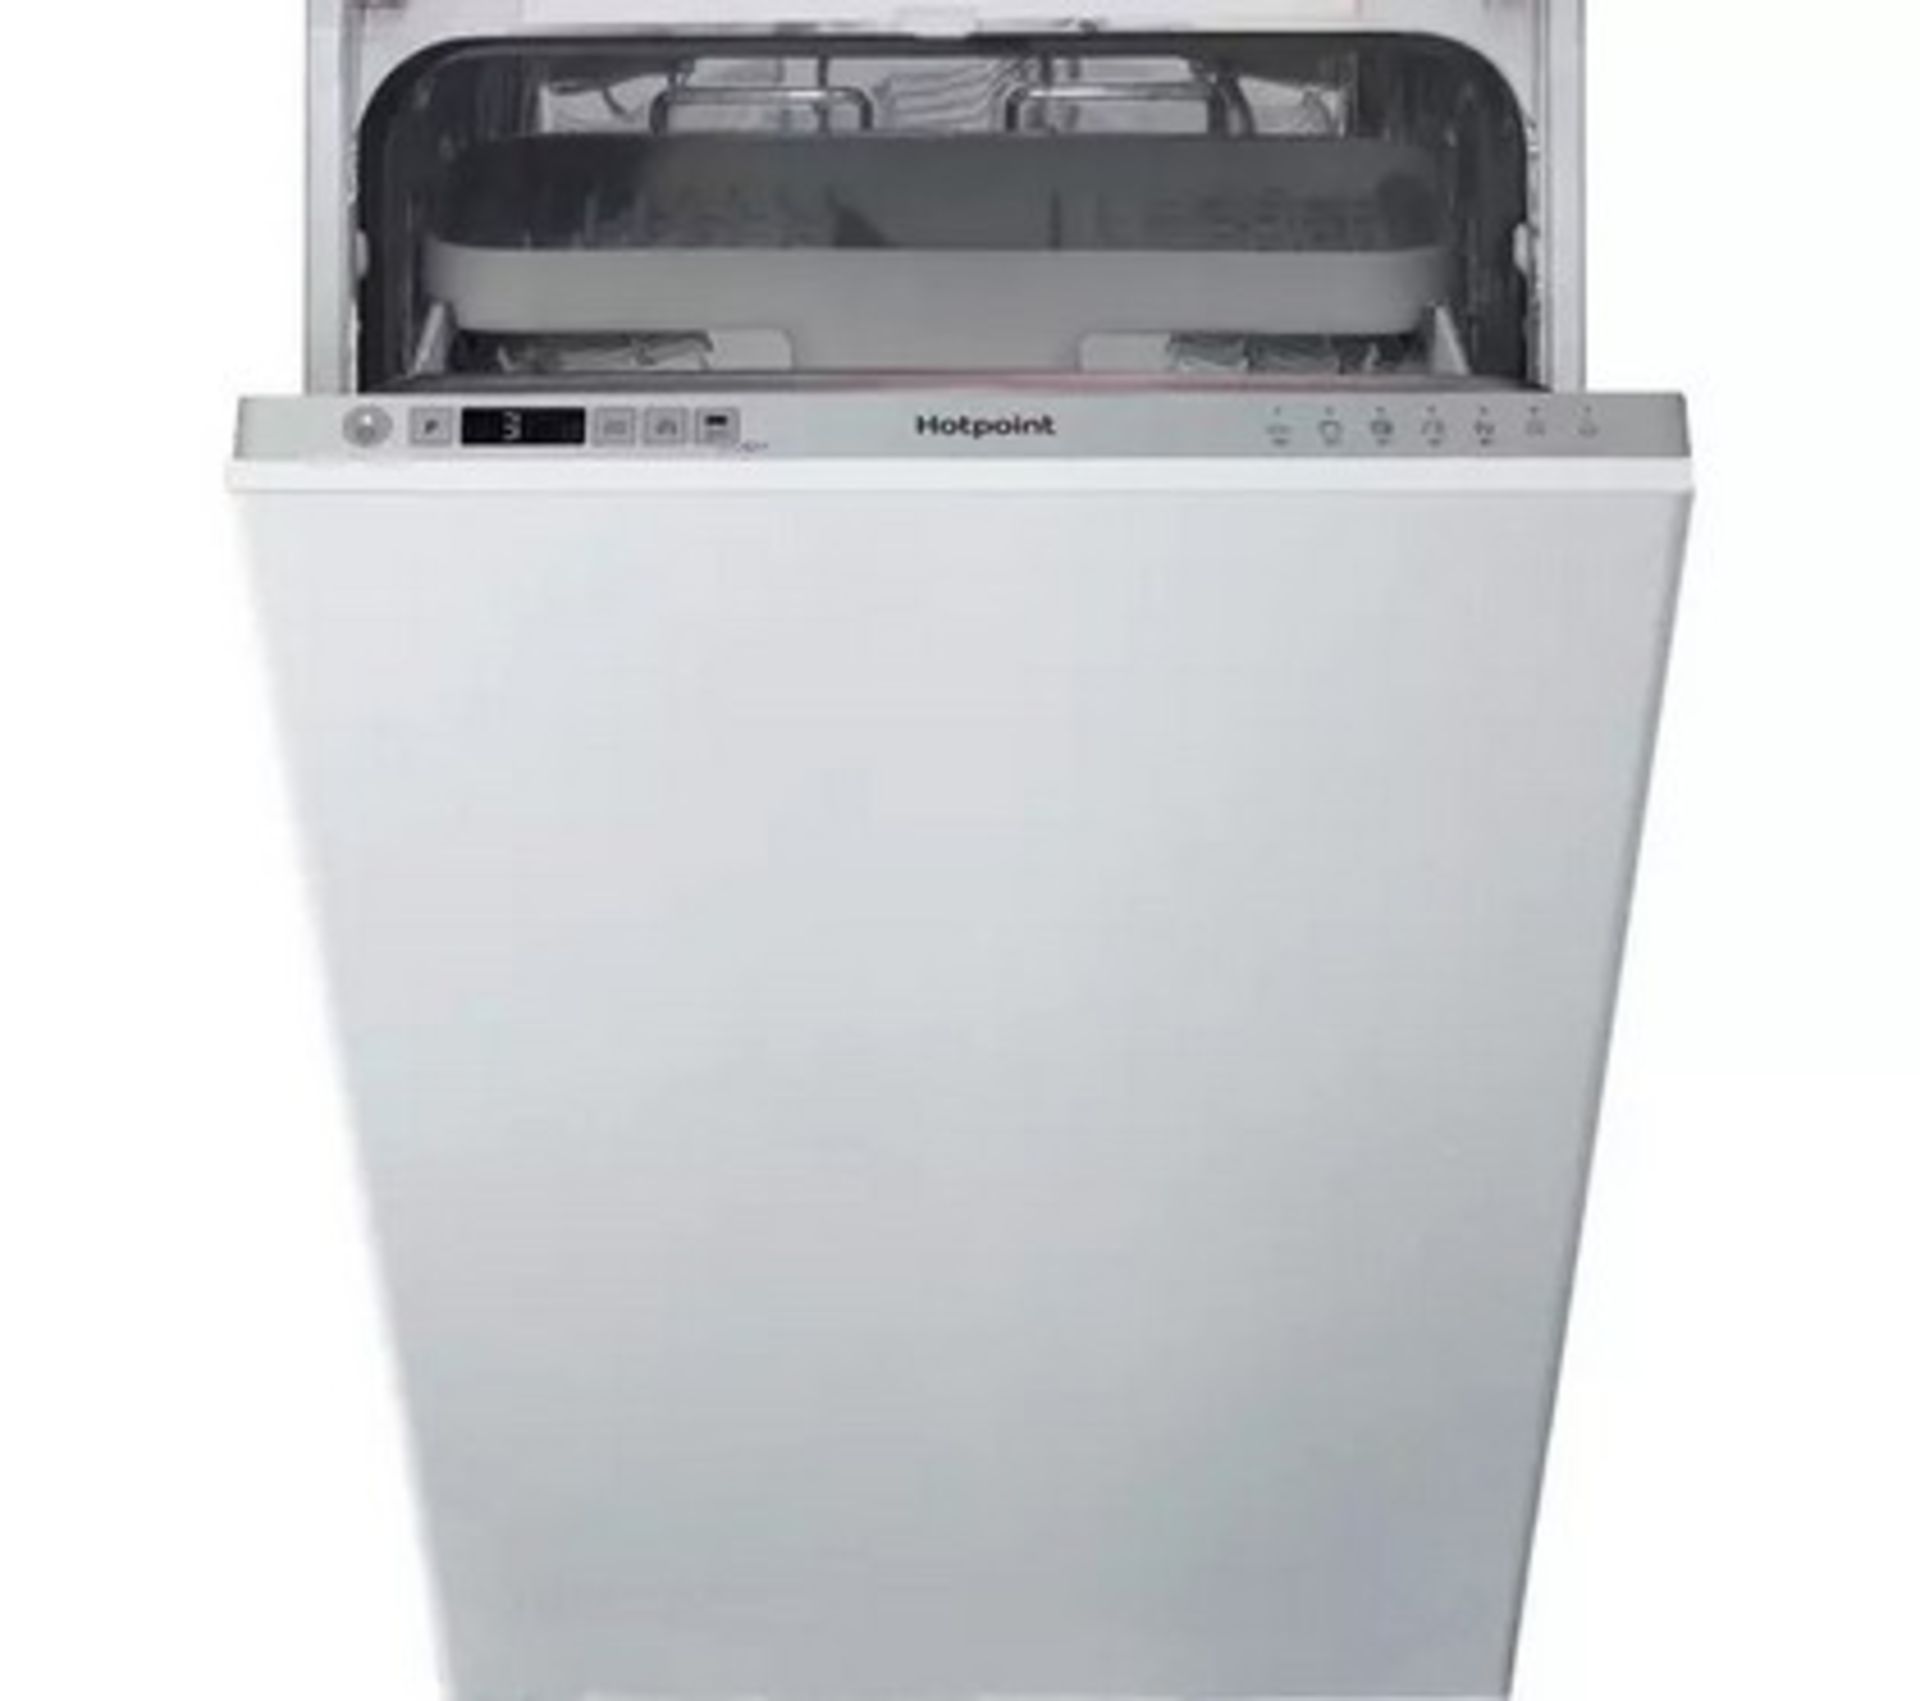 RRP £296.00 HOTPOINT 230-240V 50HZ 1900W WHIRLPOOL BUILT-IN DISHWASHER SILVER MODEL: HSIC 3M19 C UK